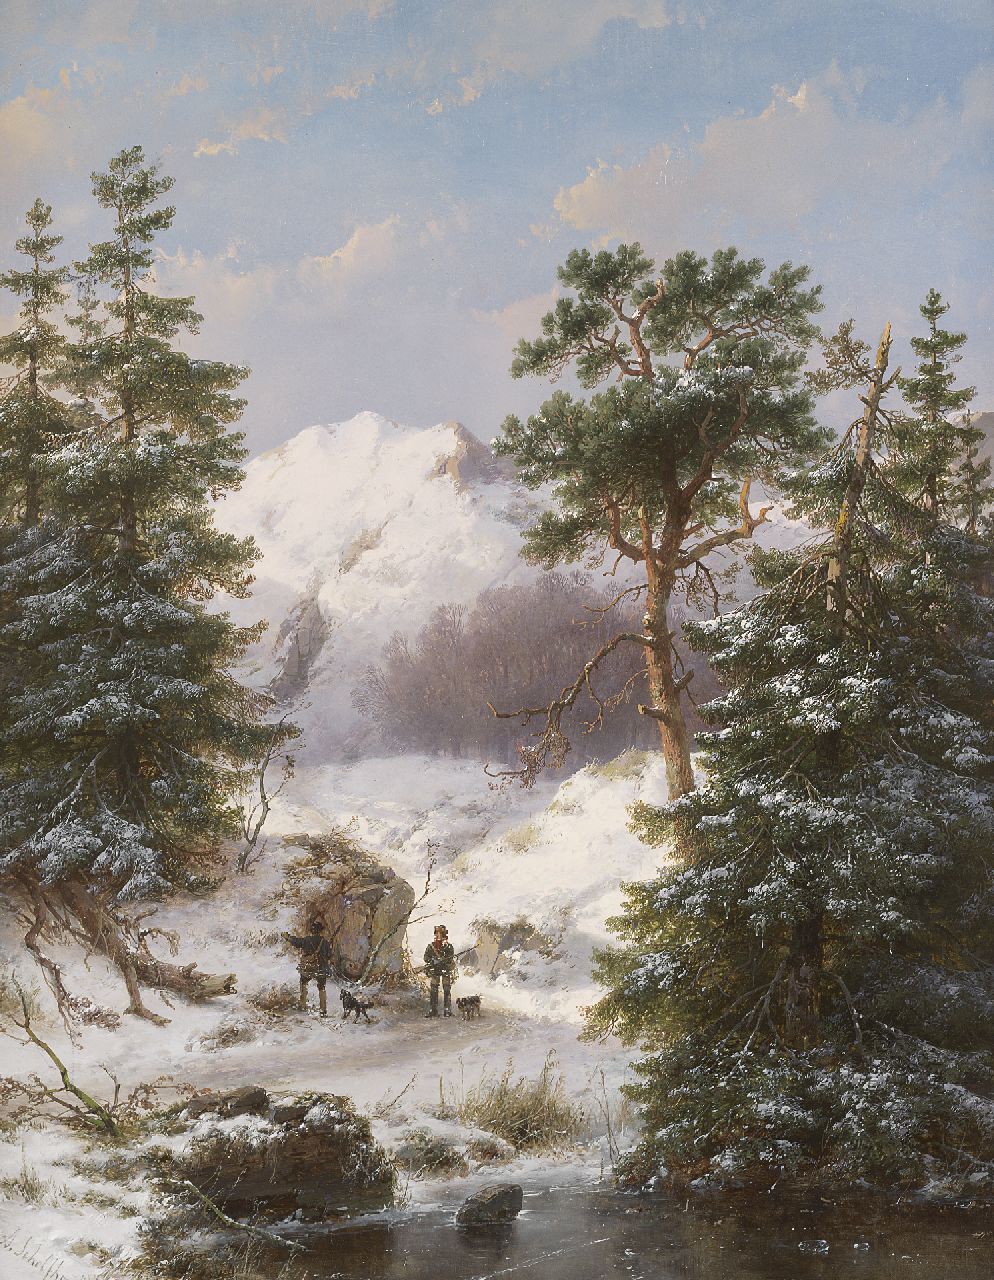 Schelfhout A.  | Andreas Schelfhout, Hunters in a mountain landscape, oil on panel 62.4 x 48.0 cm, signed l.l. and painted '55